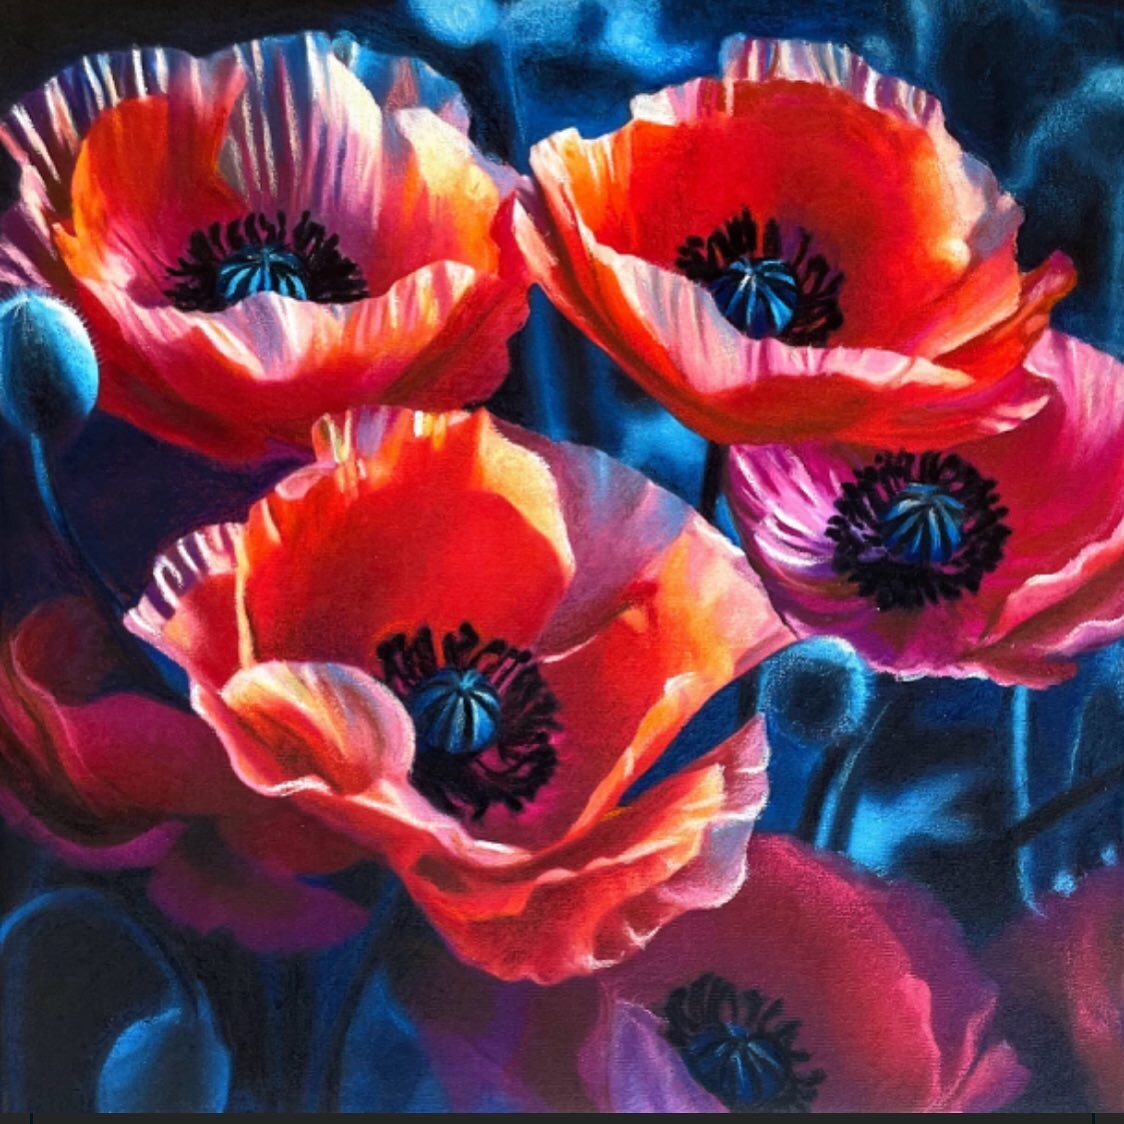 Here it is! My first floral, Poppies in ANZAC, Oil and pastel on canvas. Taking suggestions for your favourite flowers&hellip;

#bluethumb #redpoppies #floralart #stilllife_perfection #poppyflower #poppiesofinstagram #floralpainting